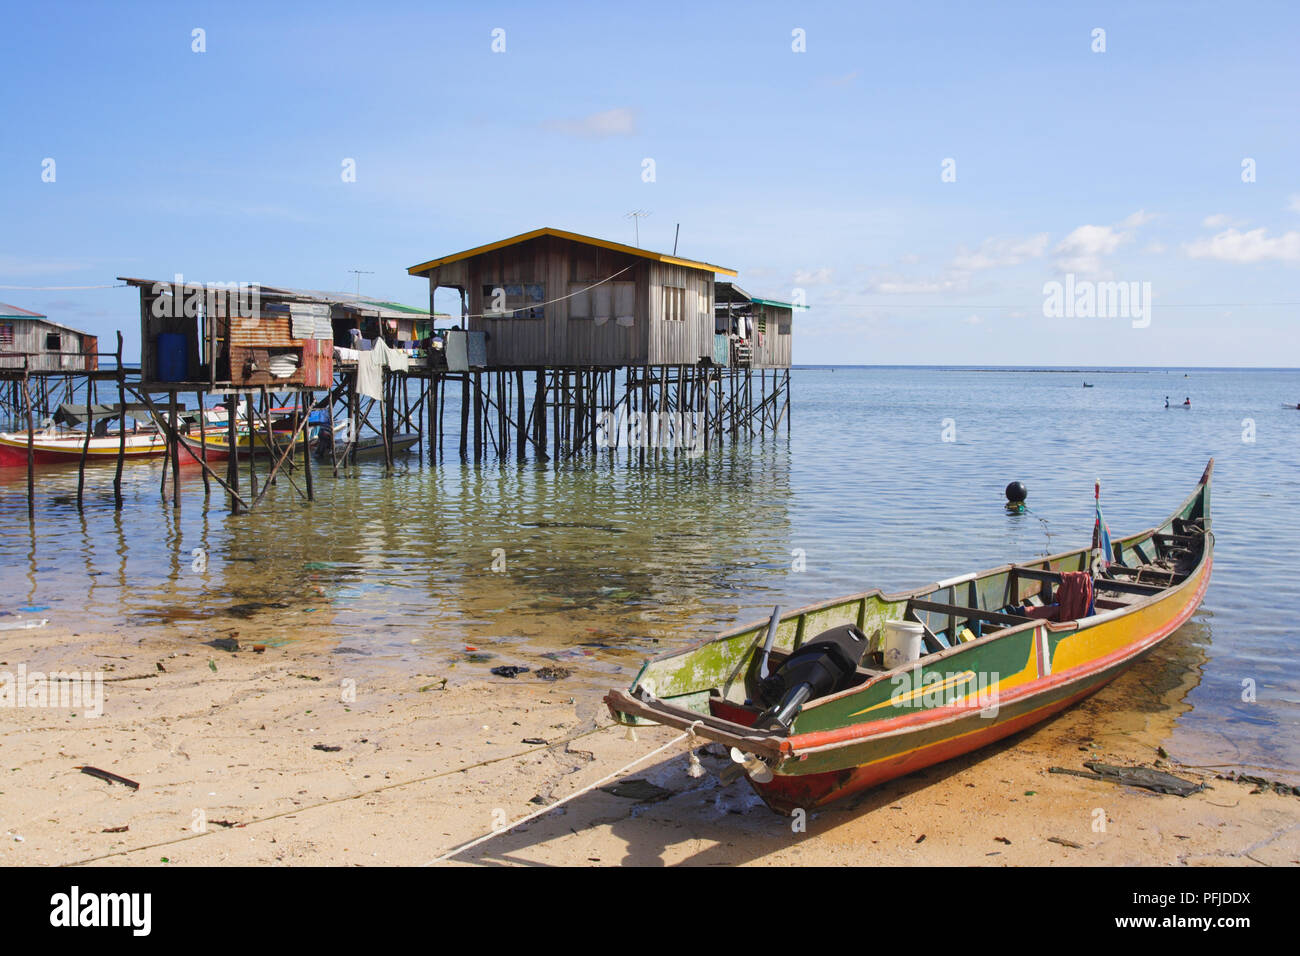 Malaysia, Sabah, Mabul Island, stilt houses in the sea, and a boat moored on the beach nearby, close-up Stock Photo